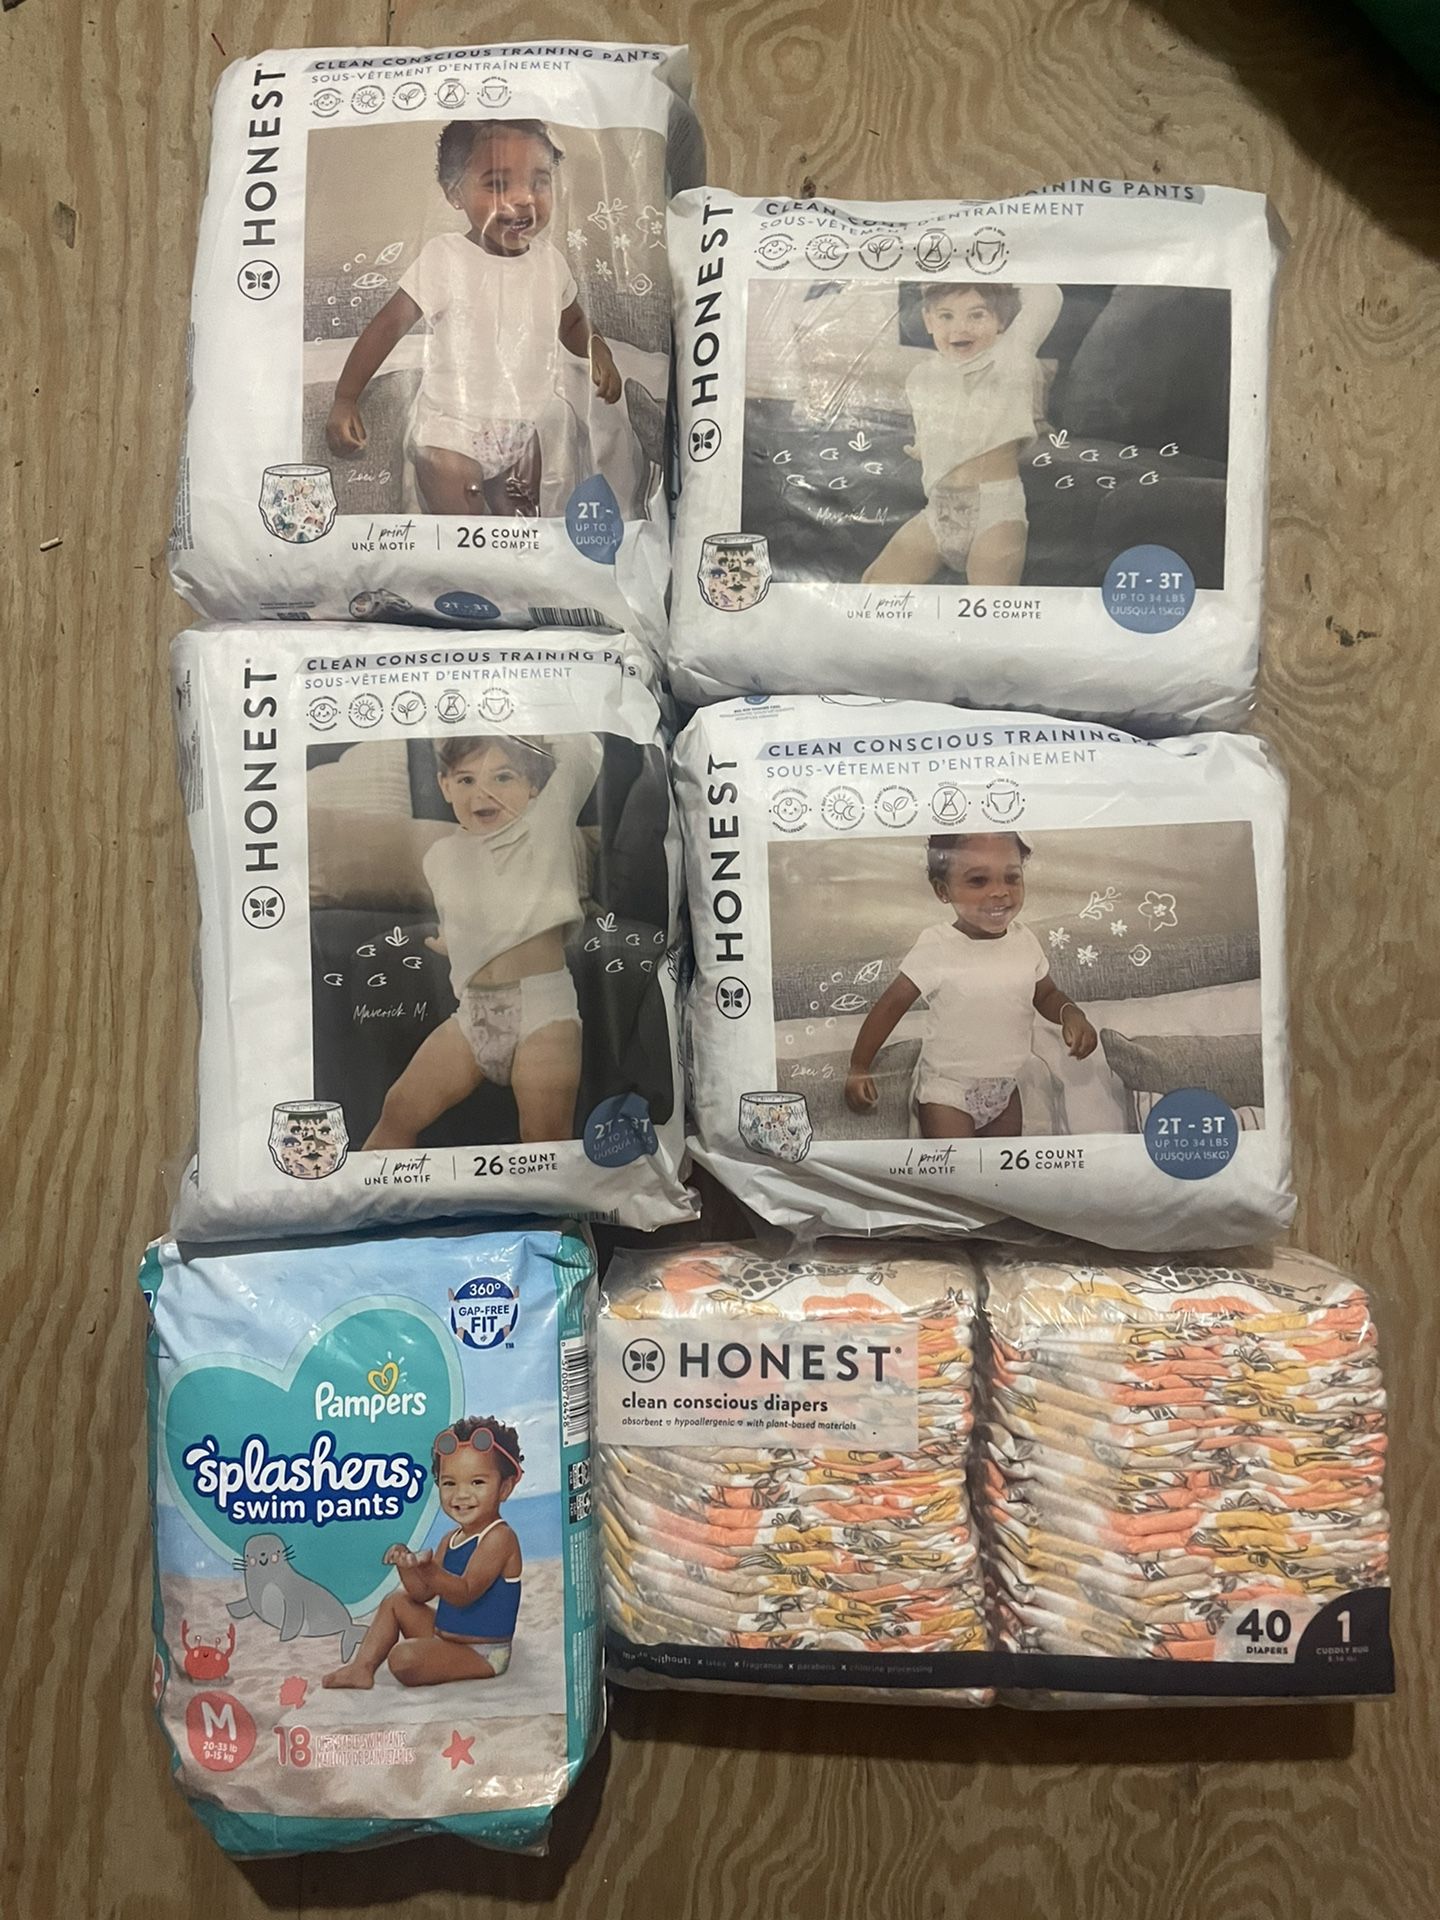 Honest Diapers and Pampers Splashers